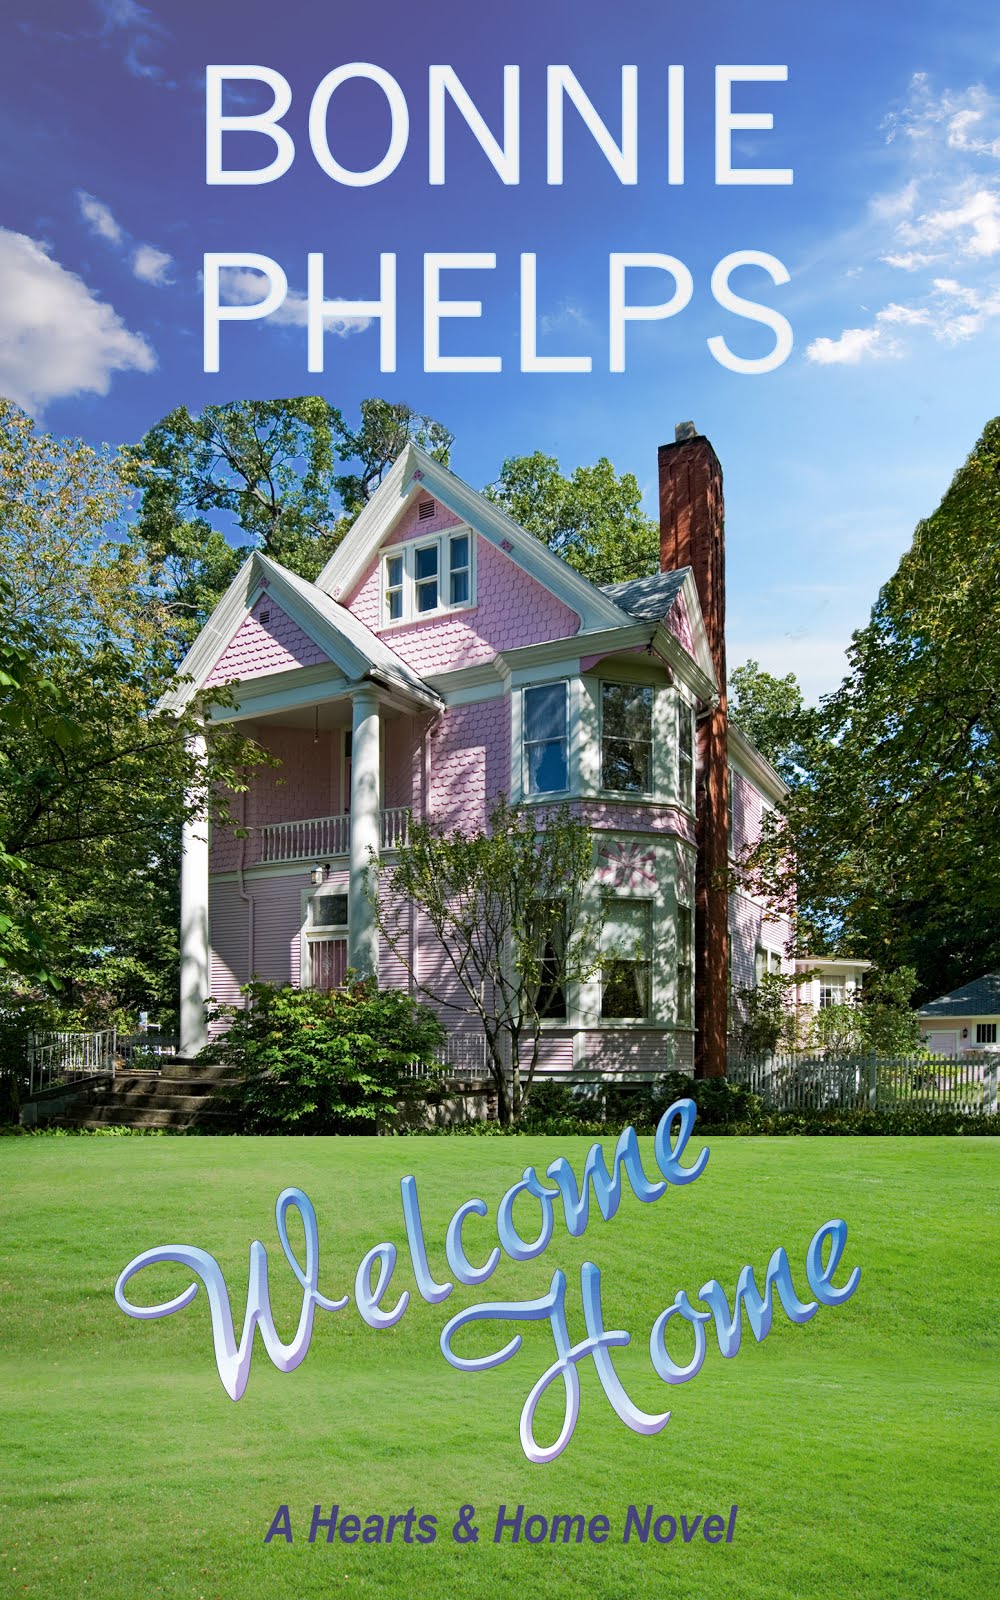 Read A Preview of "Welcome Home"